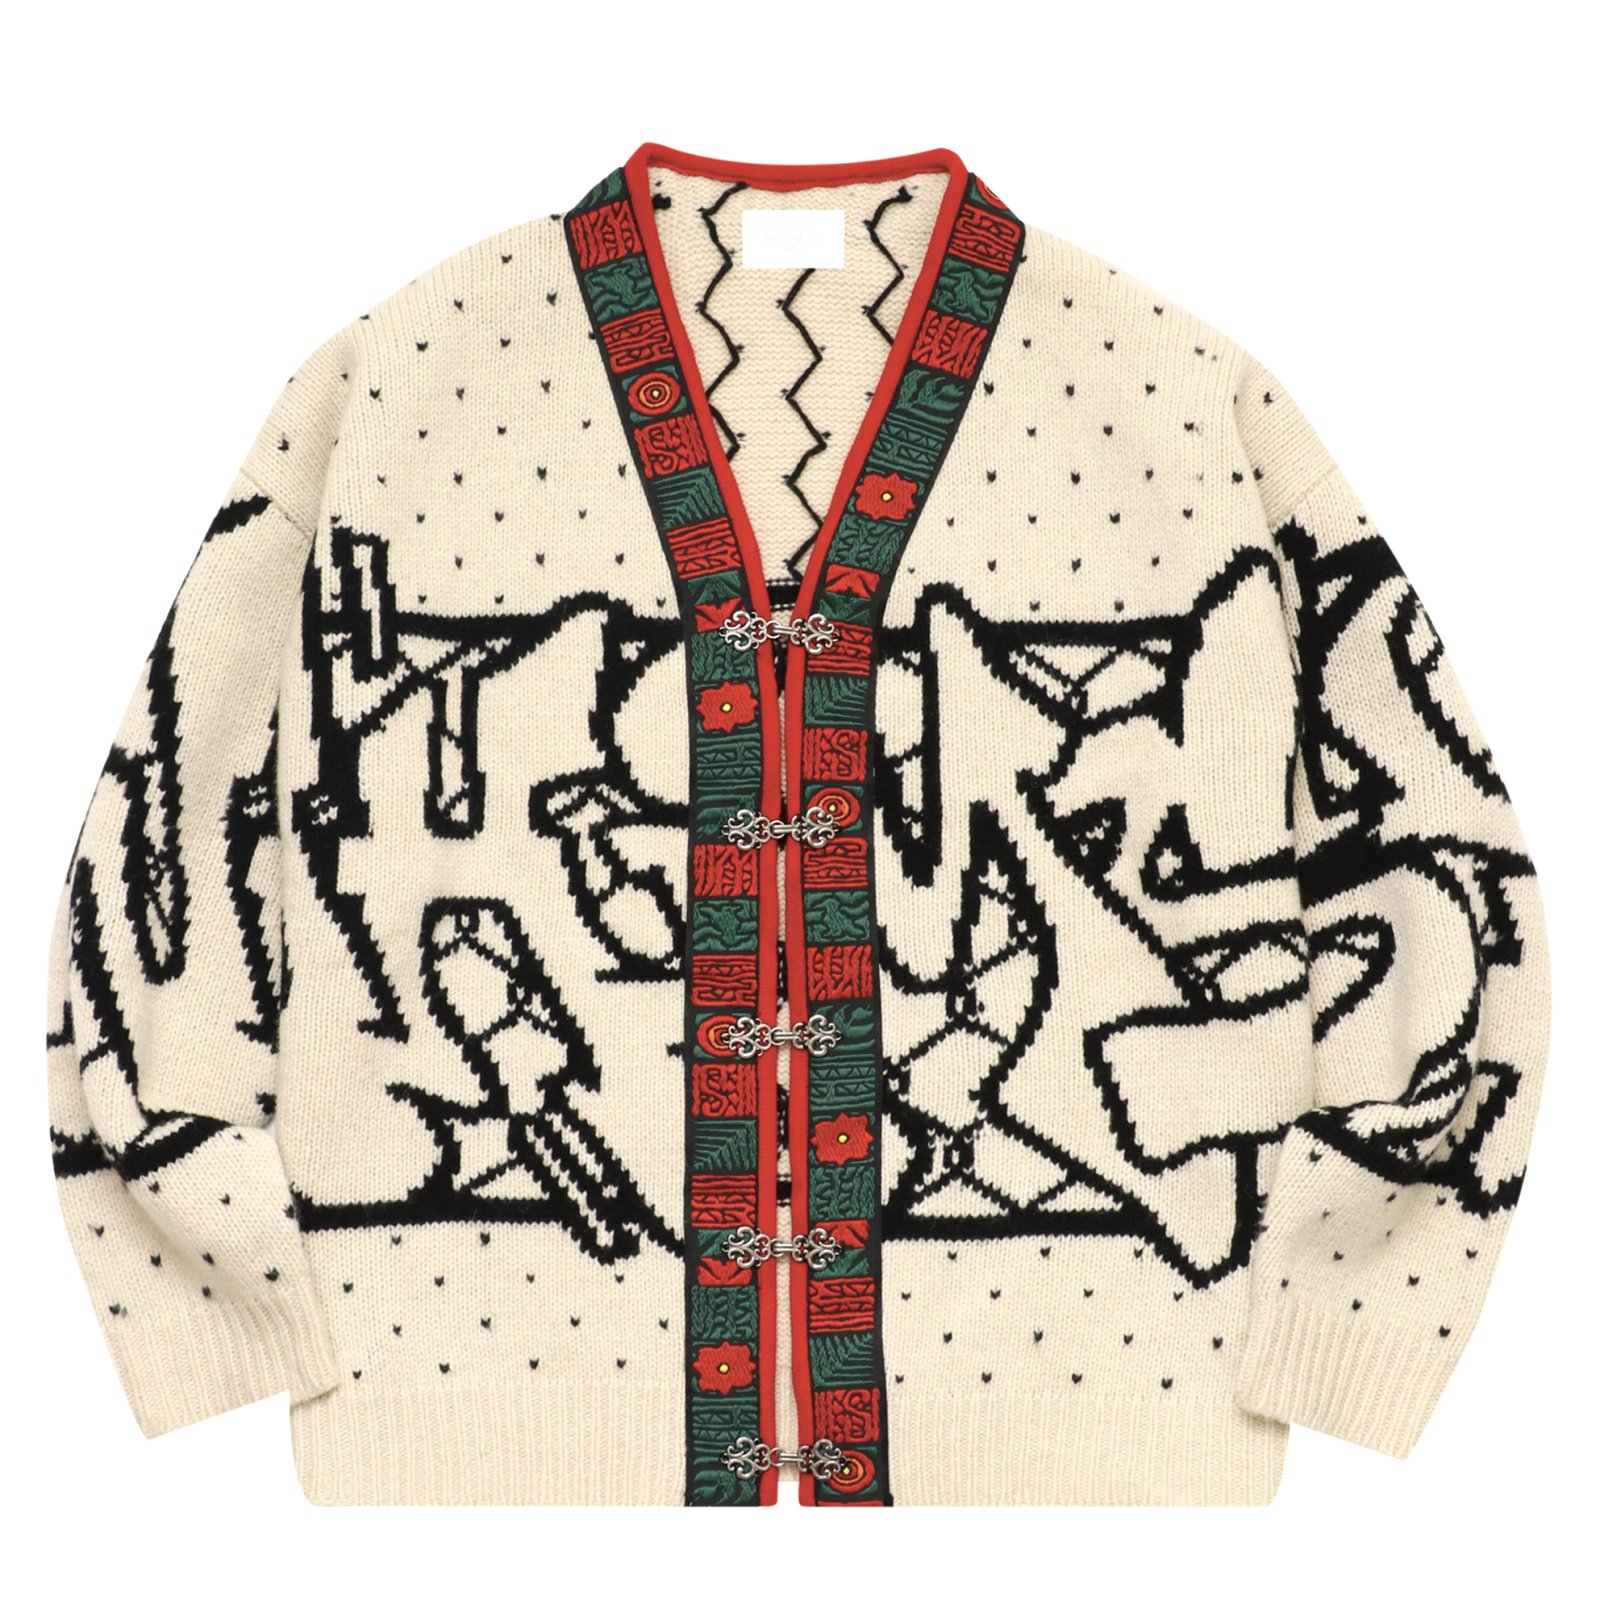 WHIMSY / TYROLEAN SWEATER袖丈53